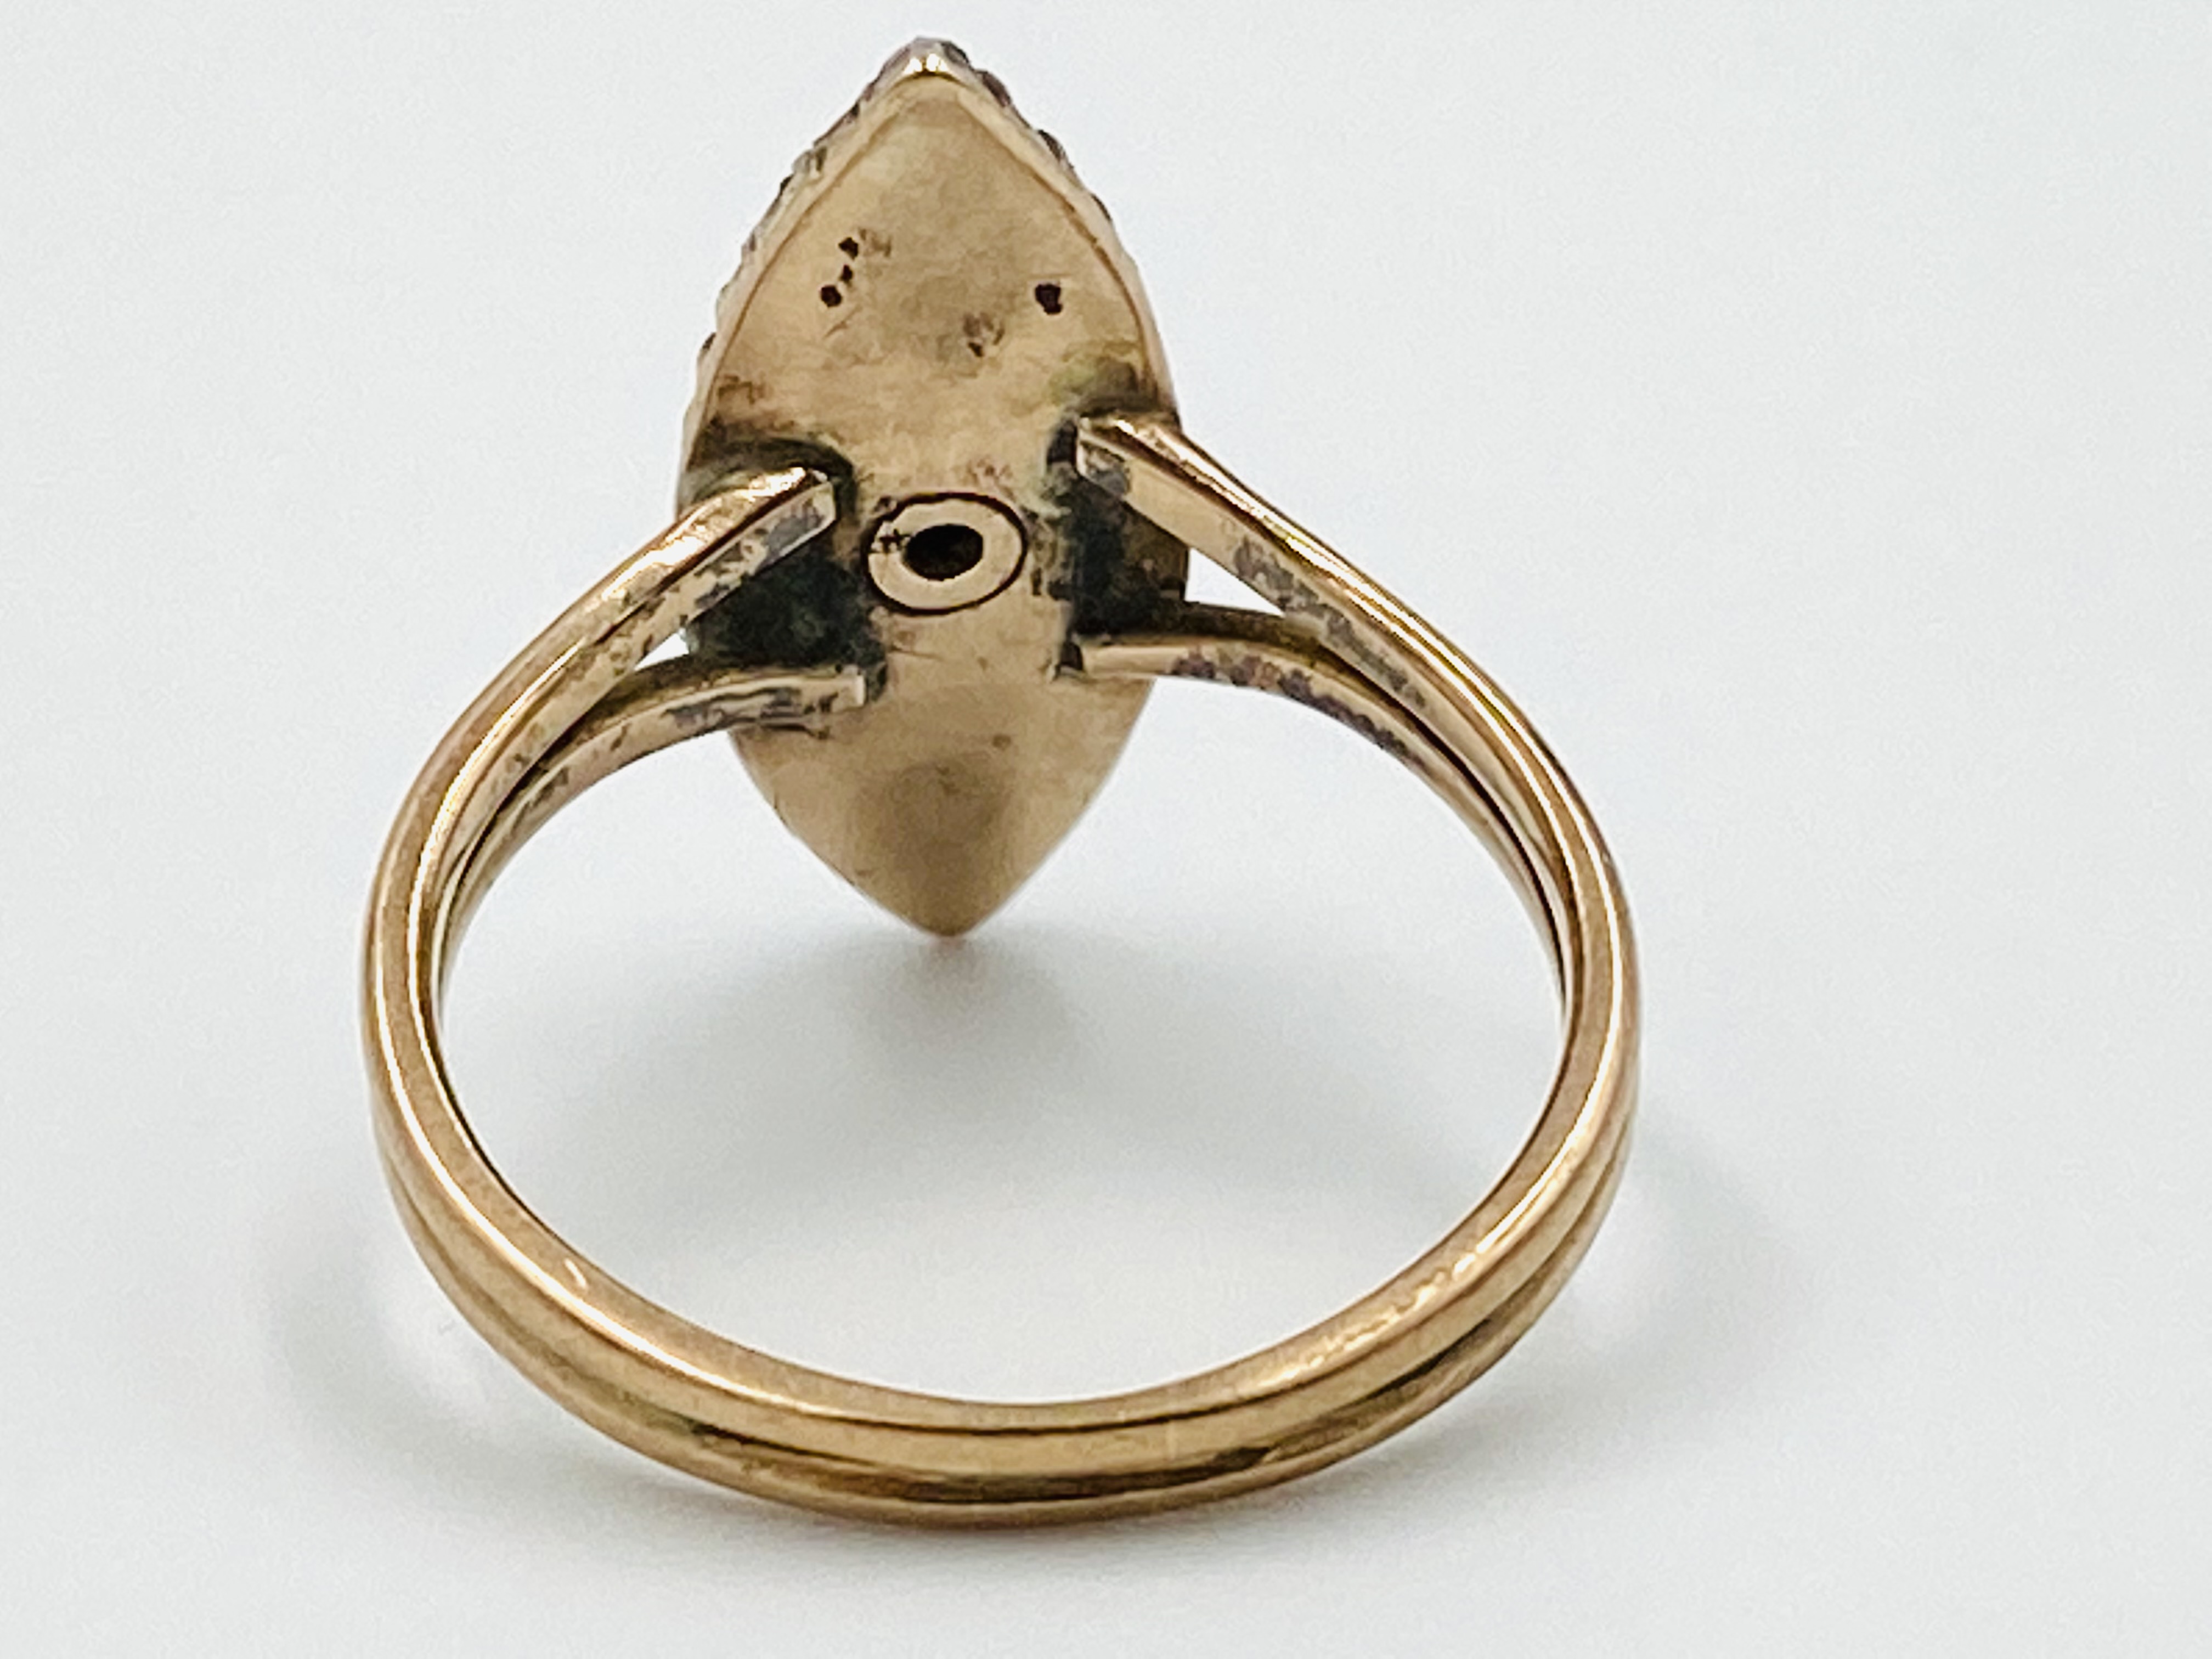 Antique gold, enamel and diamond ring - Image 4 of 5